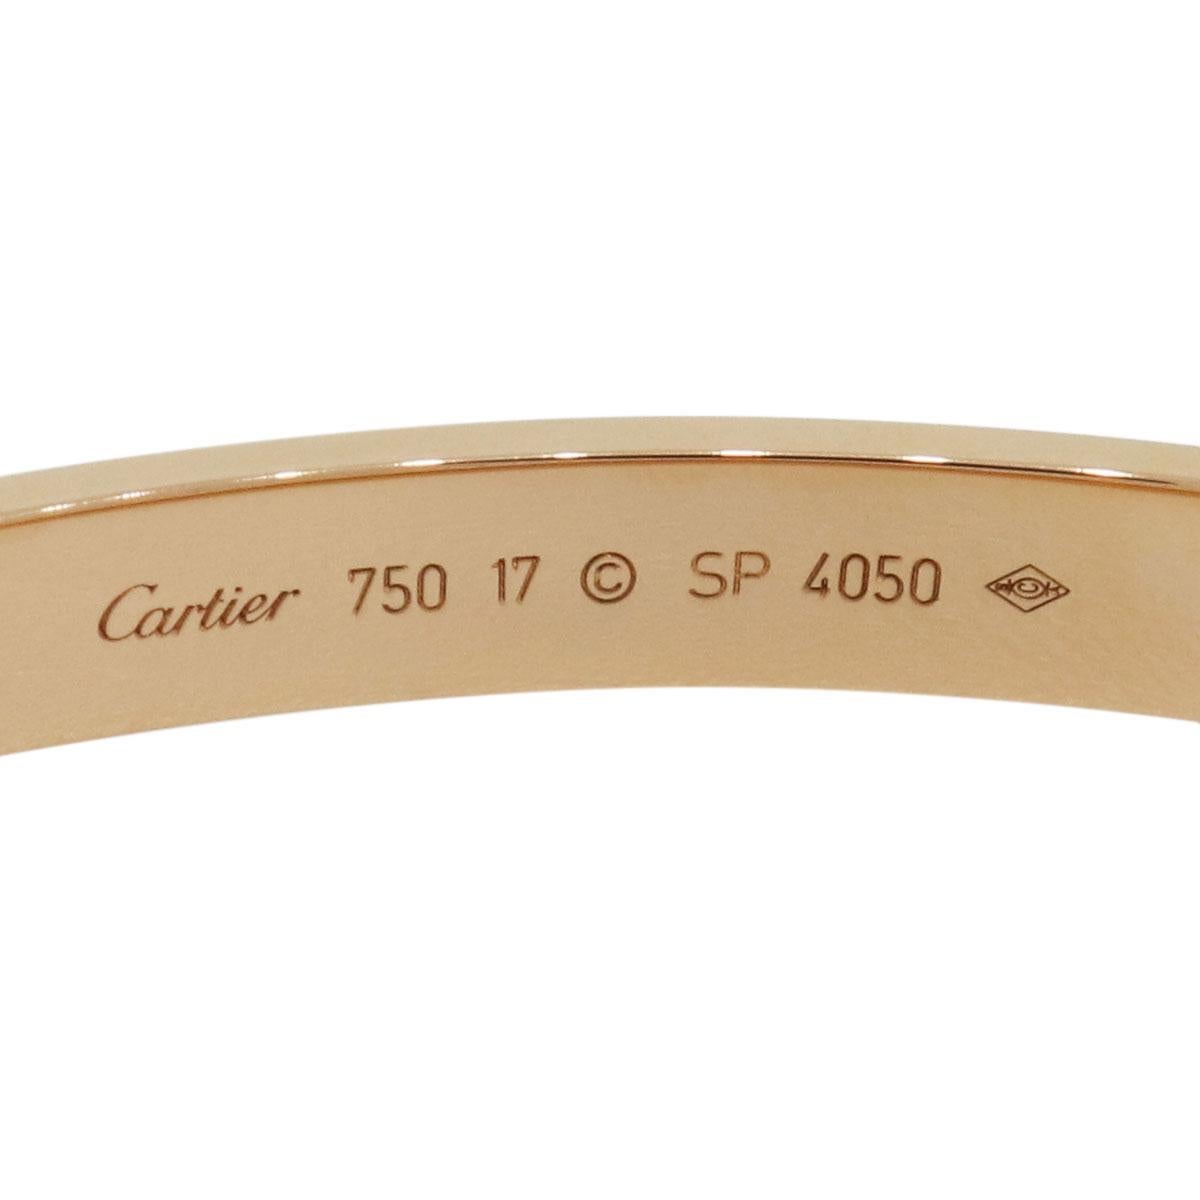 Designer: Cartier
Material: 18k Rose Gold
Style: Rose Gold LOVE Bracelet
Bangle Size: Size 17
Total Weight: 30g (19.3dwt)
Additional Details: This item includes Cartier box and papers!
SKU: G9428